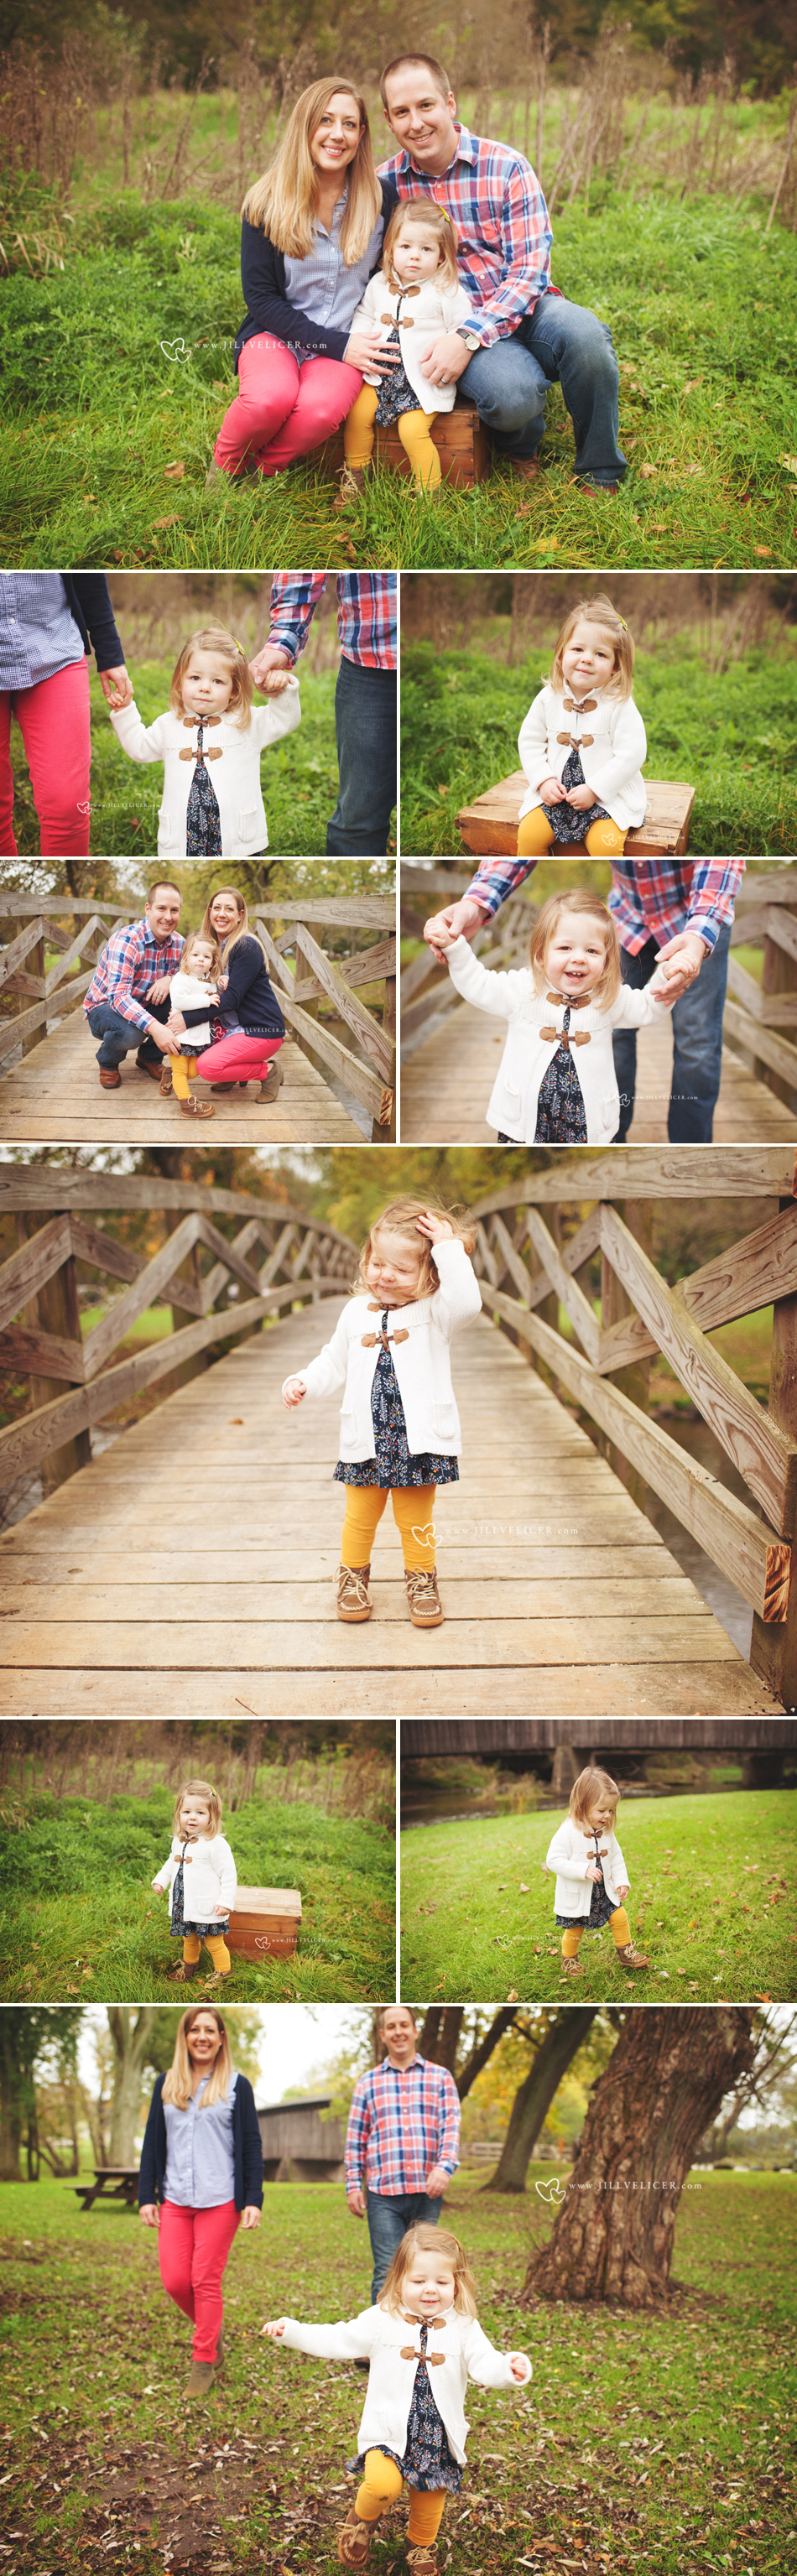 family child baby photography outdoor natural wisconsin photographer